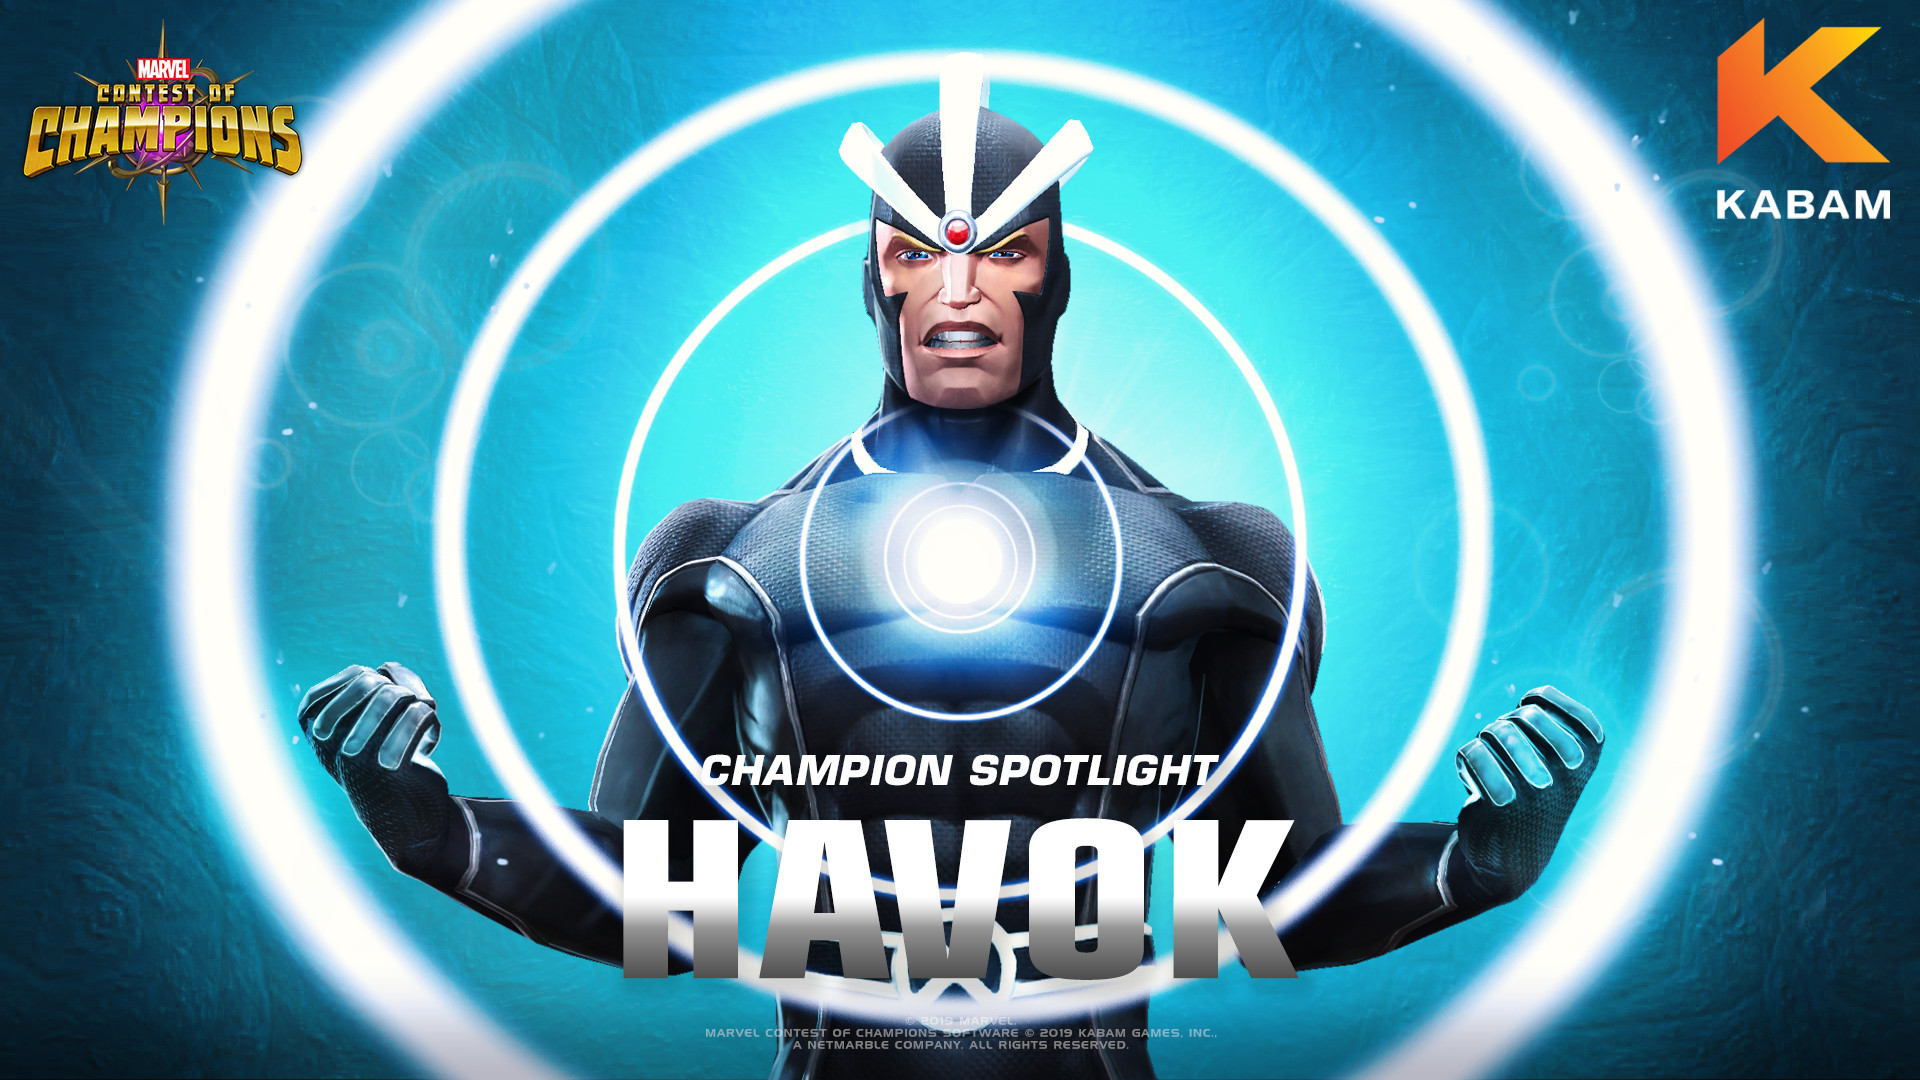 1920x1080 Havok enters The Contest February 7 at 10AM PDT!